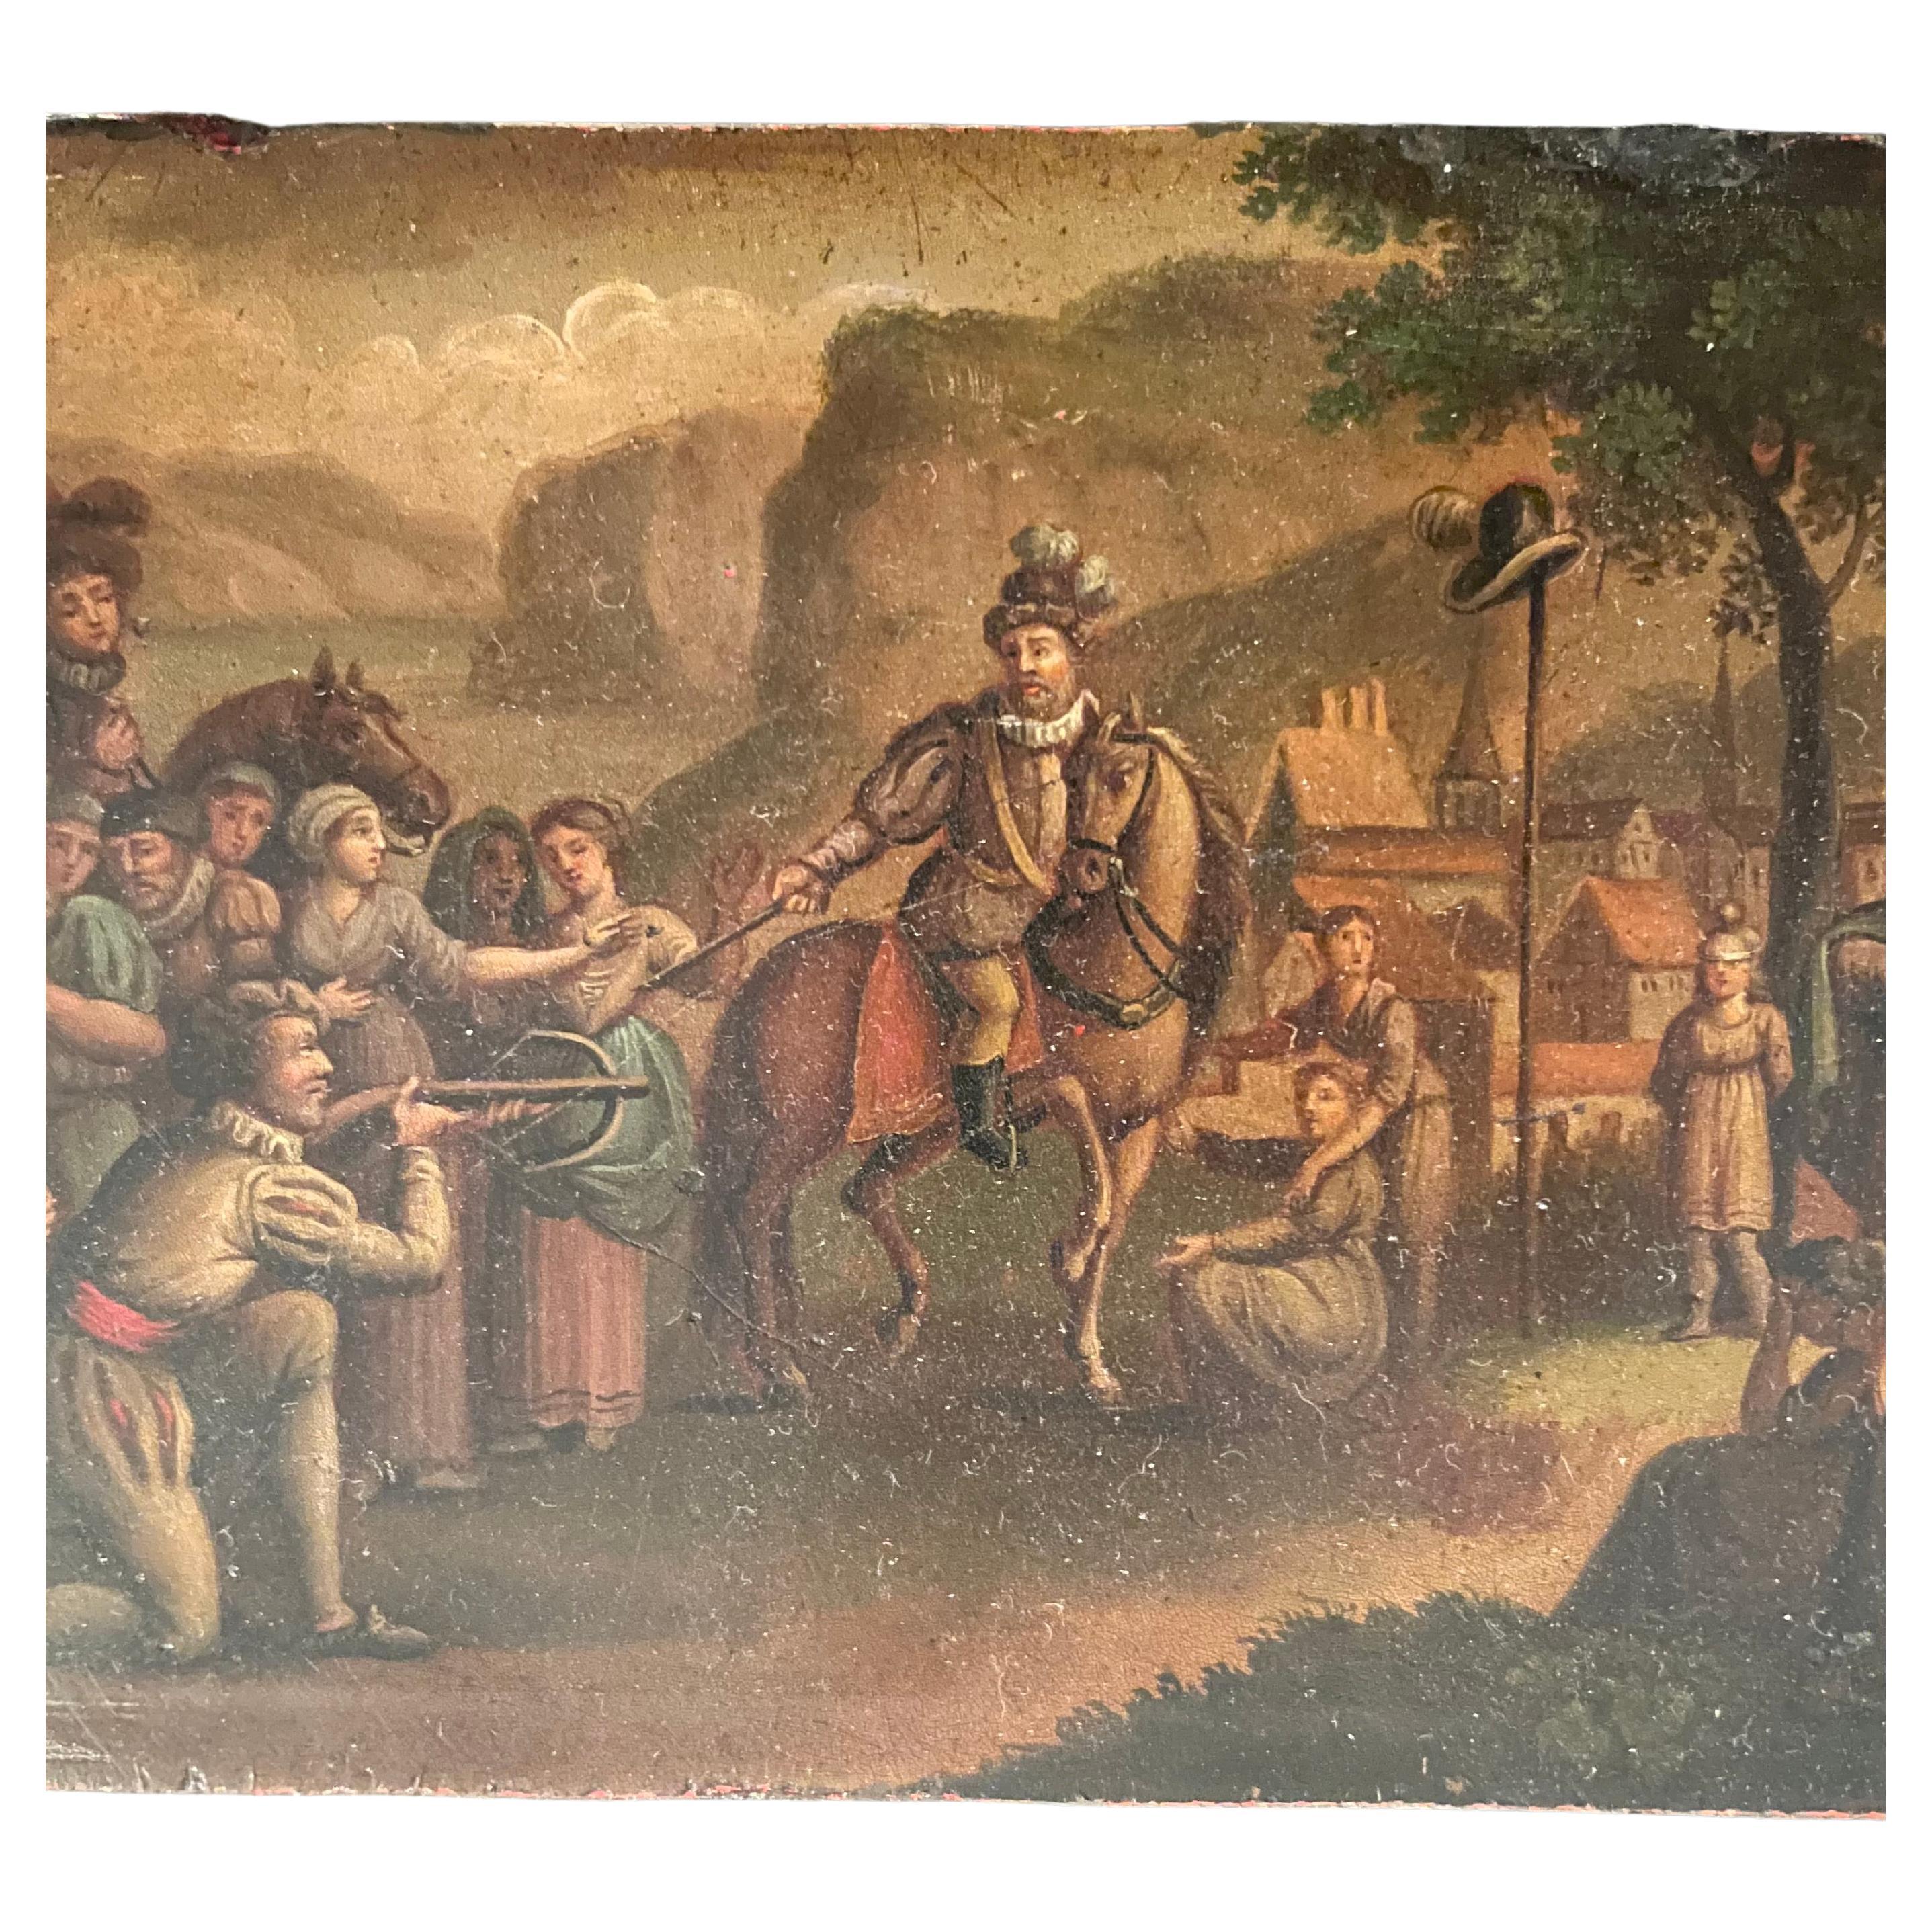 19th century miniature Swiss oil painting on tin depicting the Legend of William Tell.  Showing William Tell on bent knee aiming the crossbow at his son, bound and blindfolded against a tree with the apple on his head. Gessler is on horseback in the